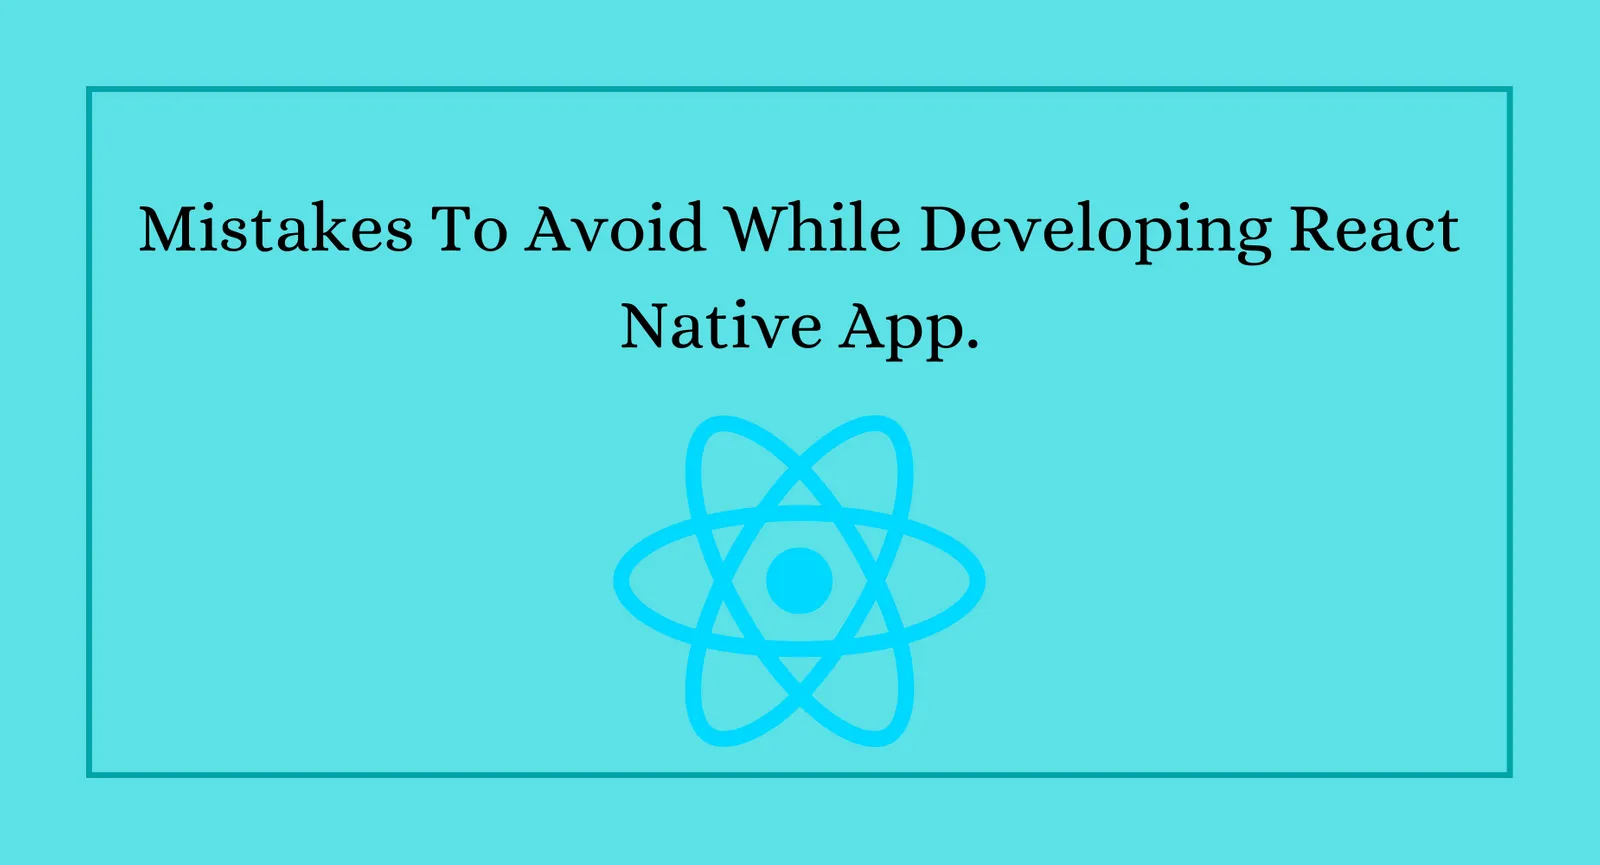 Mistakes To Avoid When Developing React Native App.